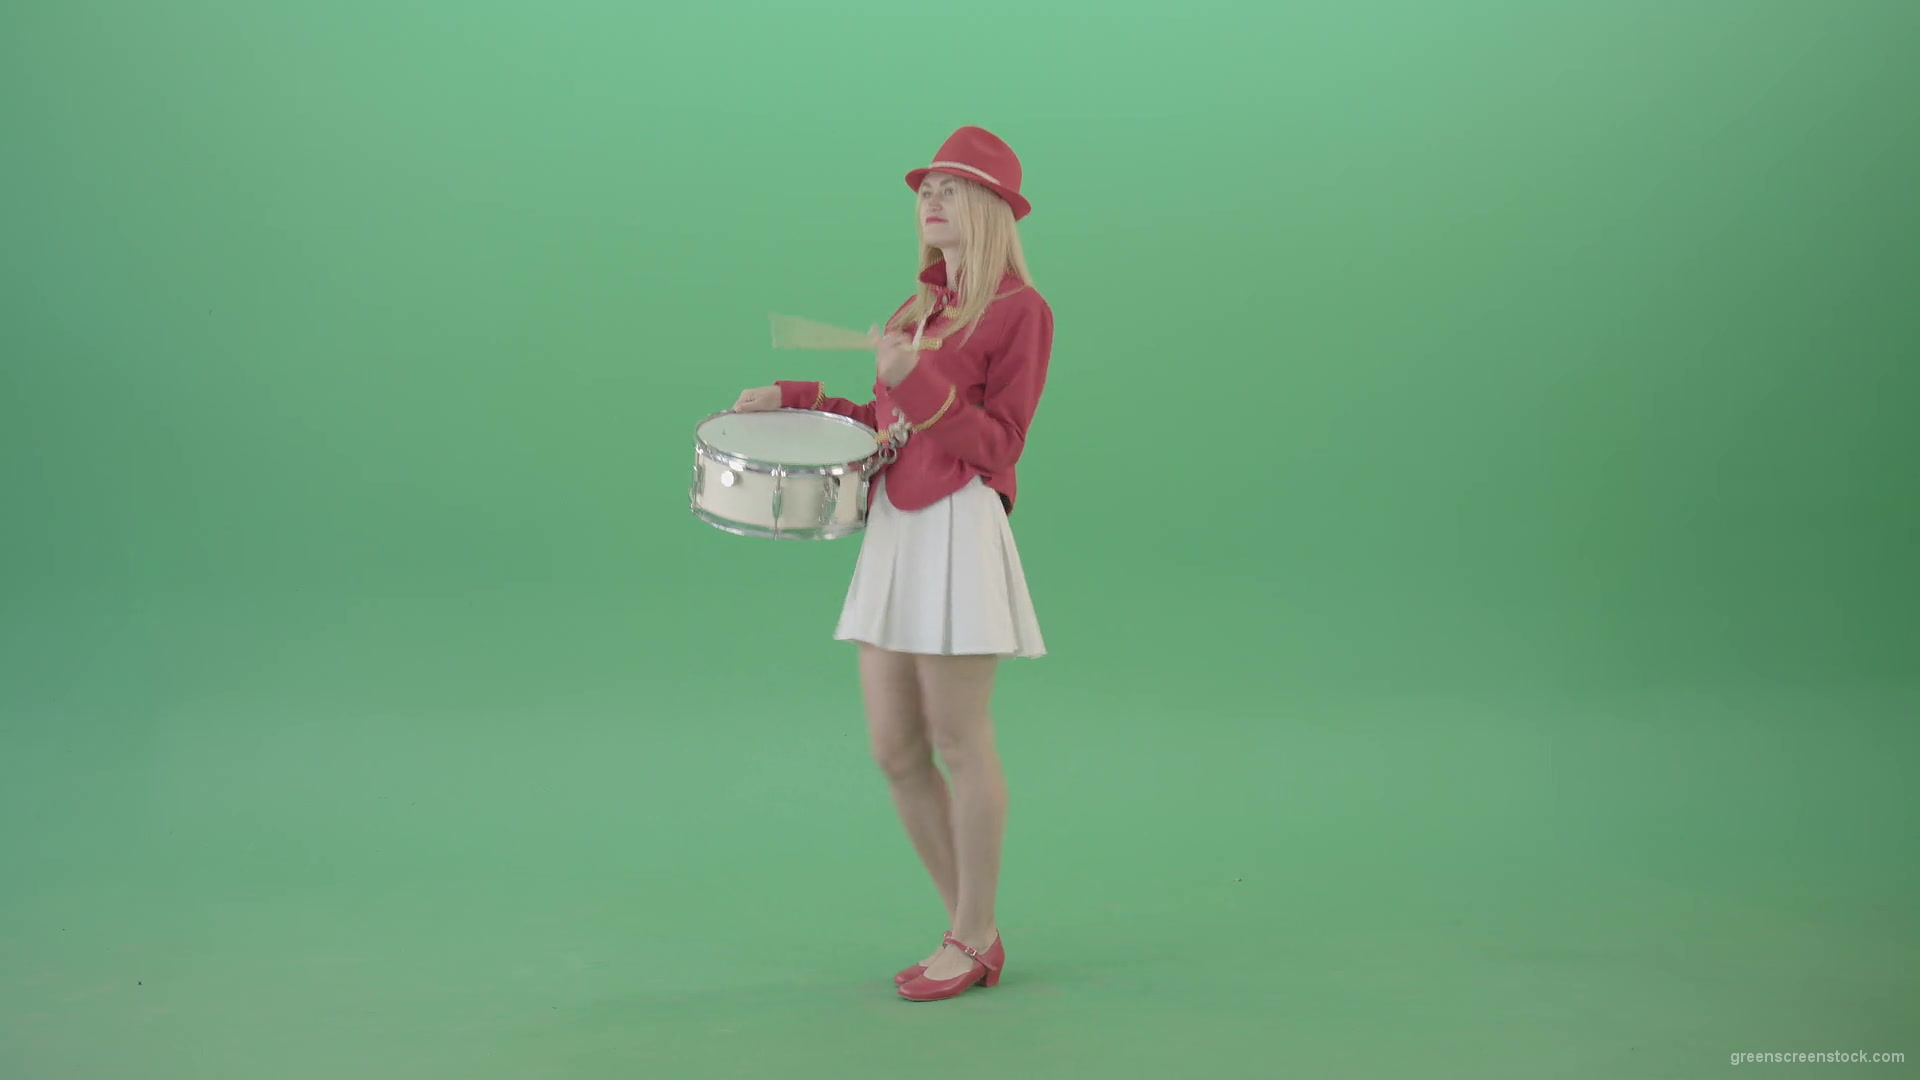 Girl-in-red-uniform-marching-and-play-snare-drum-on-green-screen-4K-Video-Footage-1920_007 Green Screen Stock